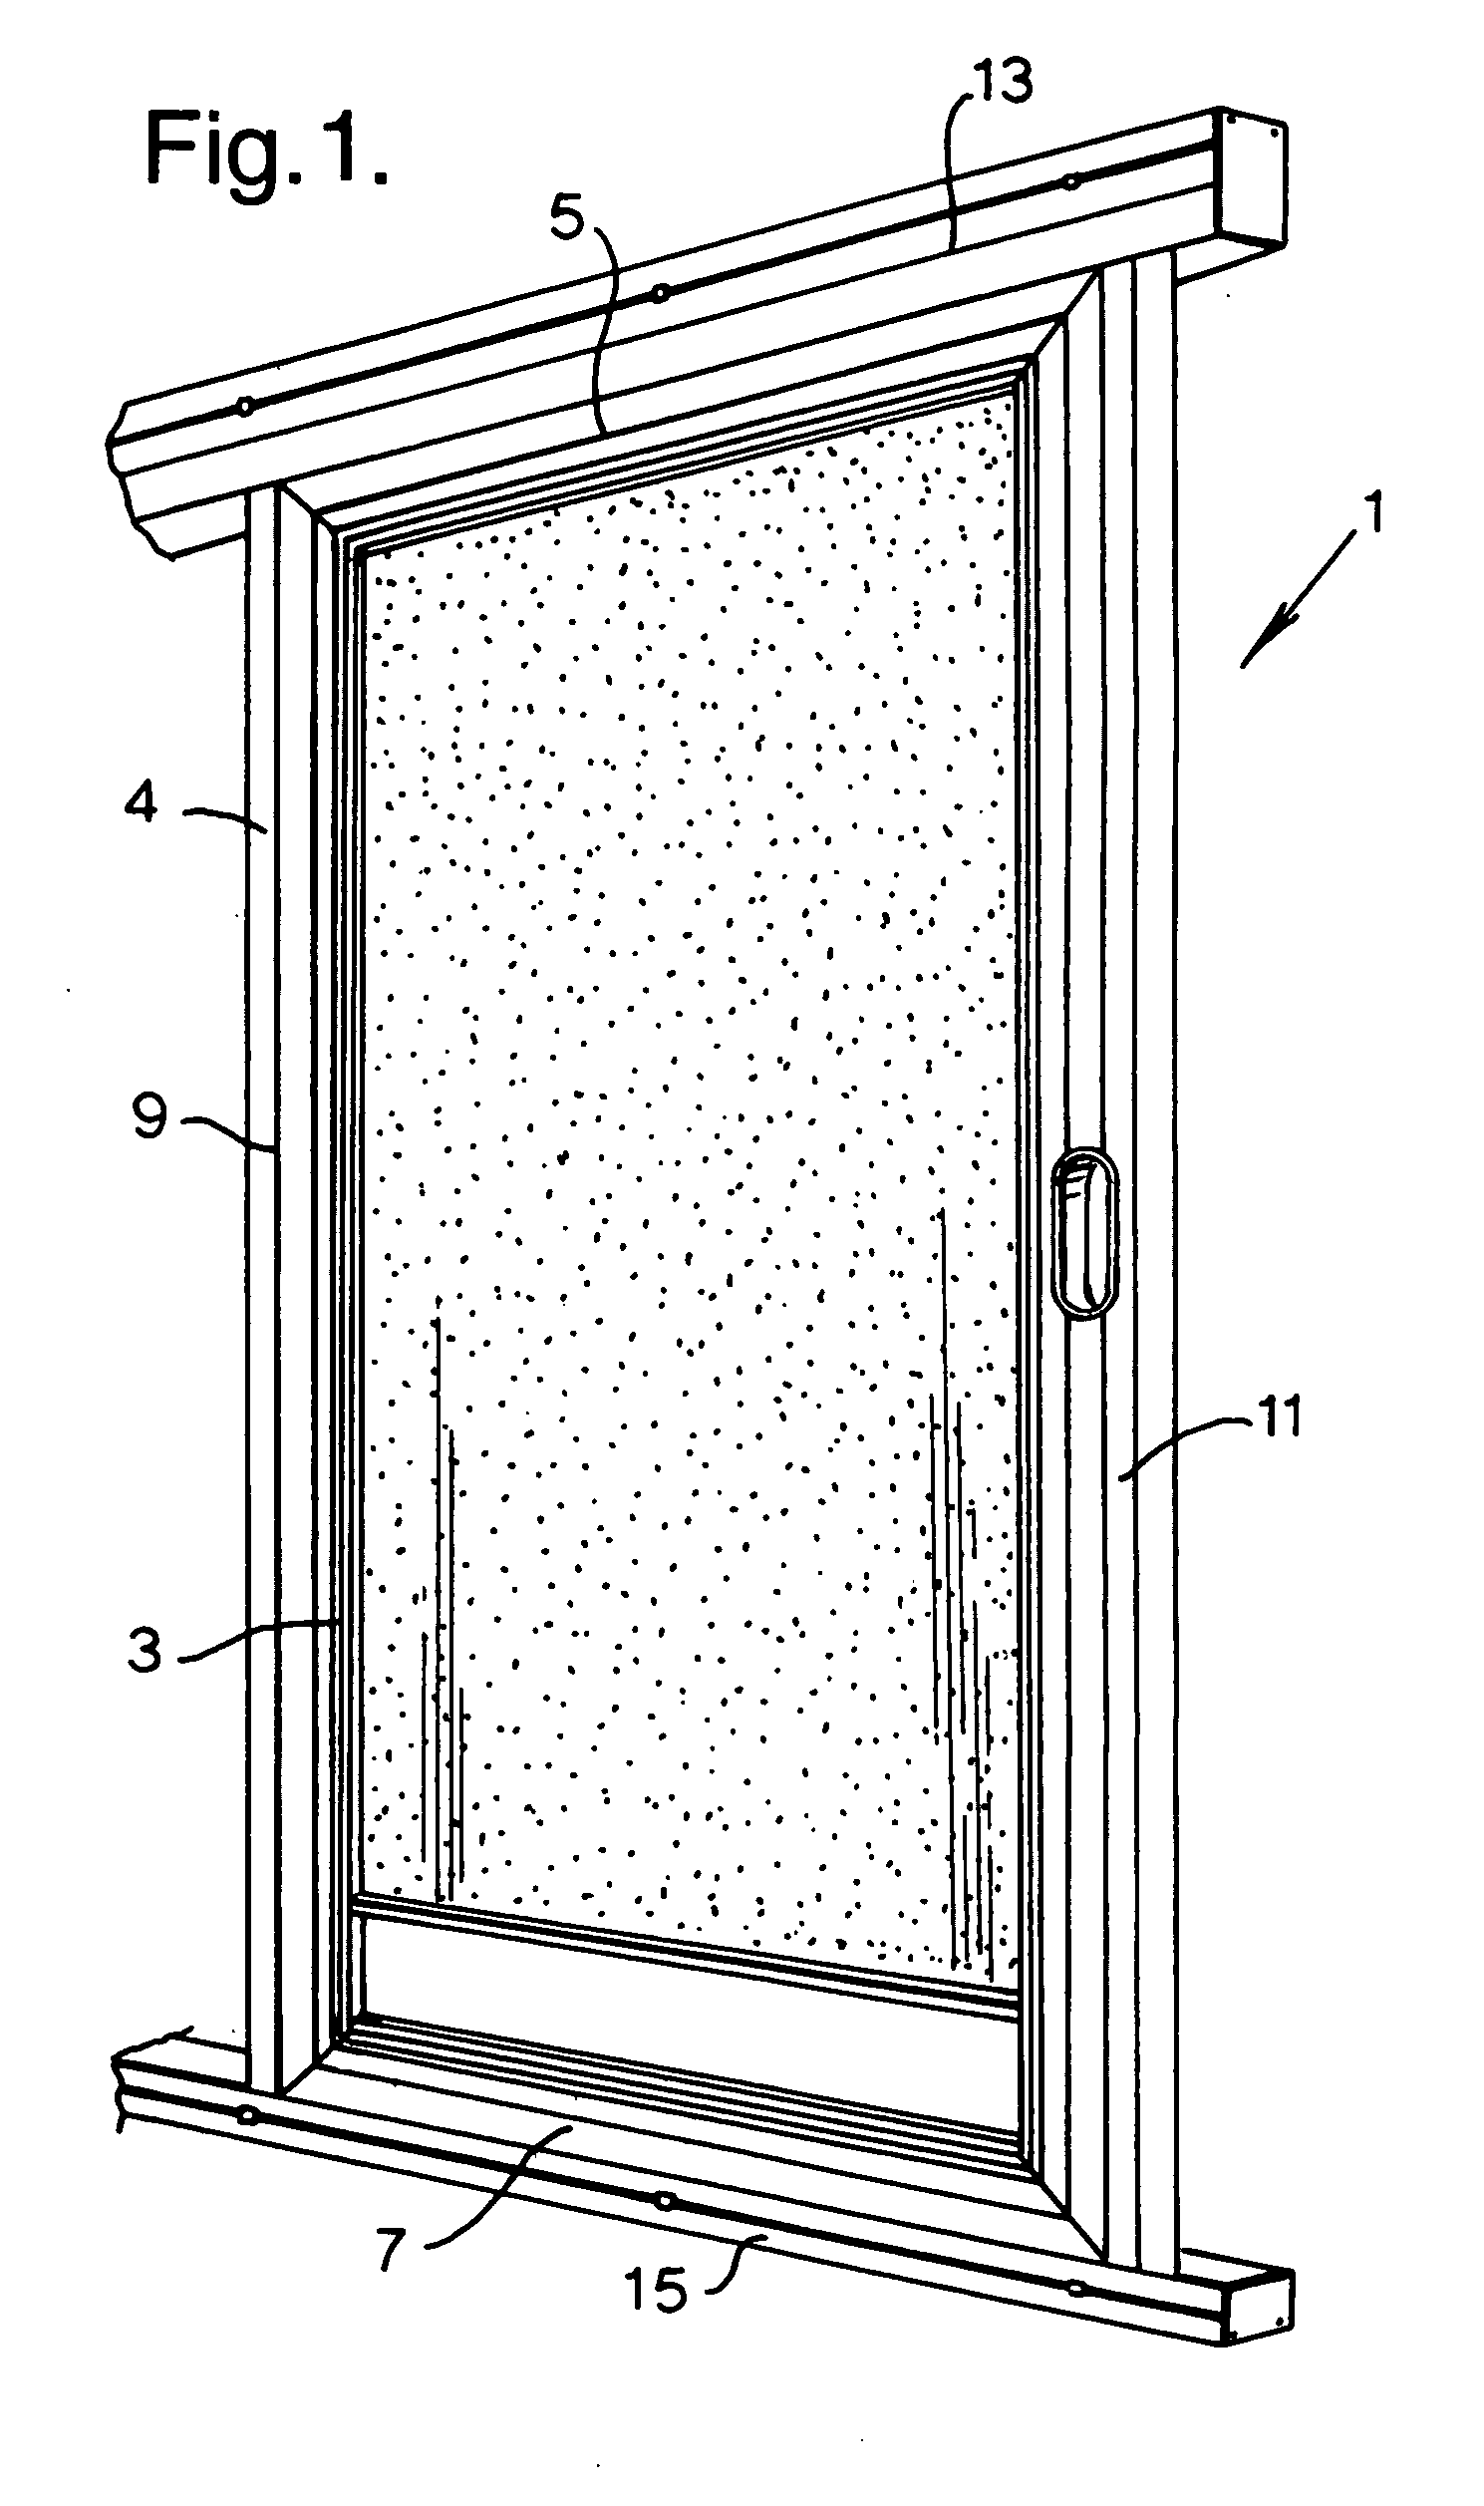 Support for a sliding panel